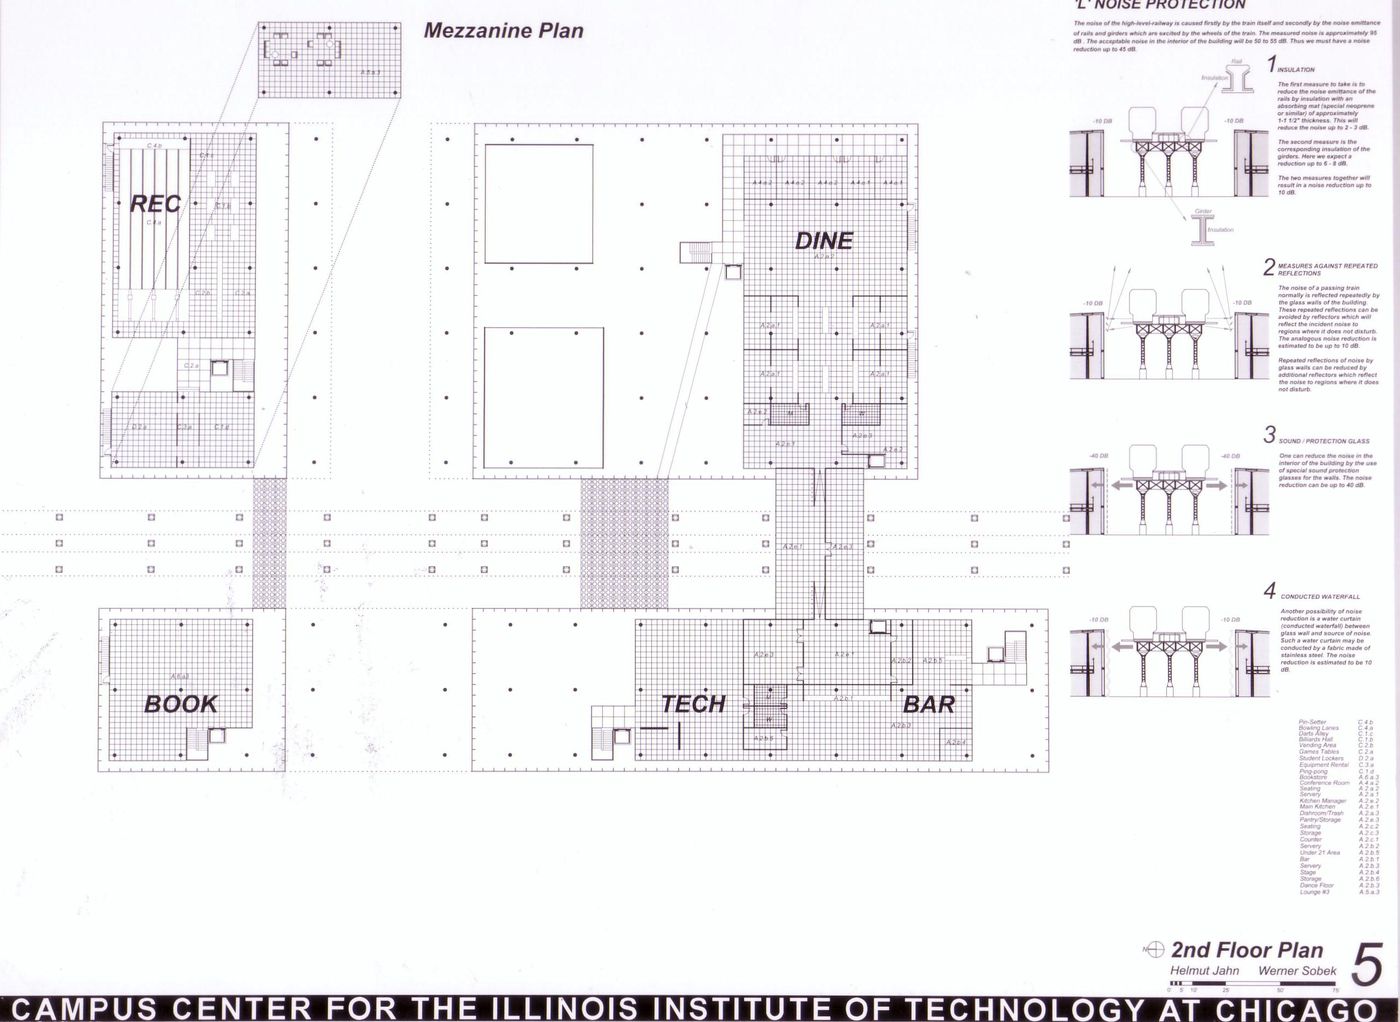 Second floor plan and description of noise protection system, submission to the Richard H. Driehaus Foundation International Design Competition for a new campus center (1997-98), Illinois Institute of Technology, Chicago, Illinois